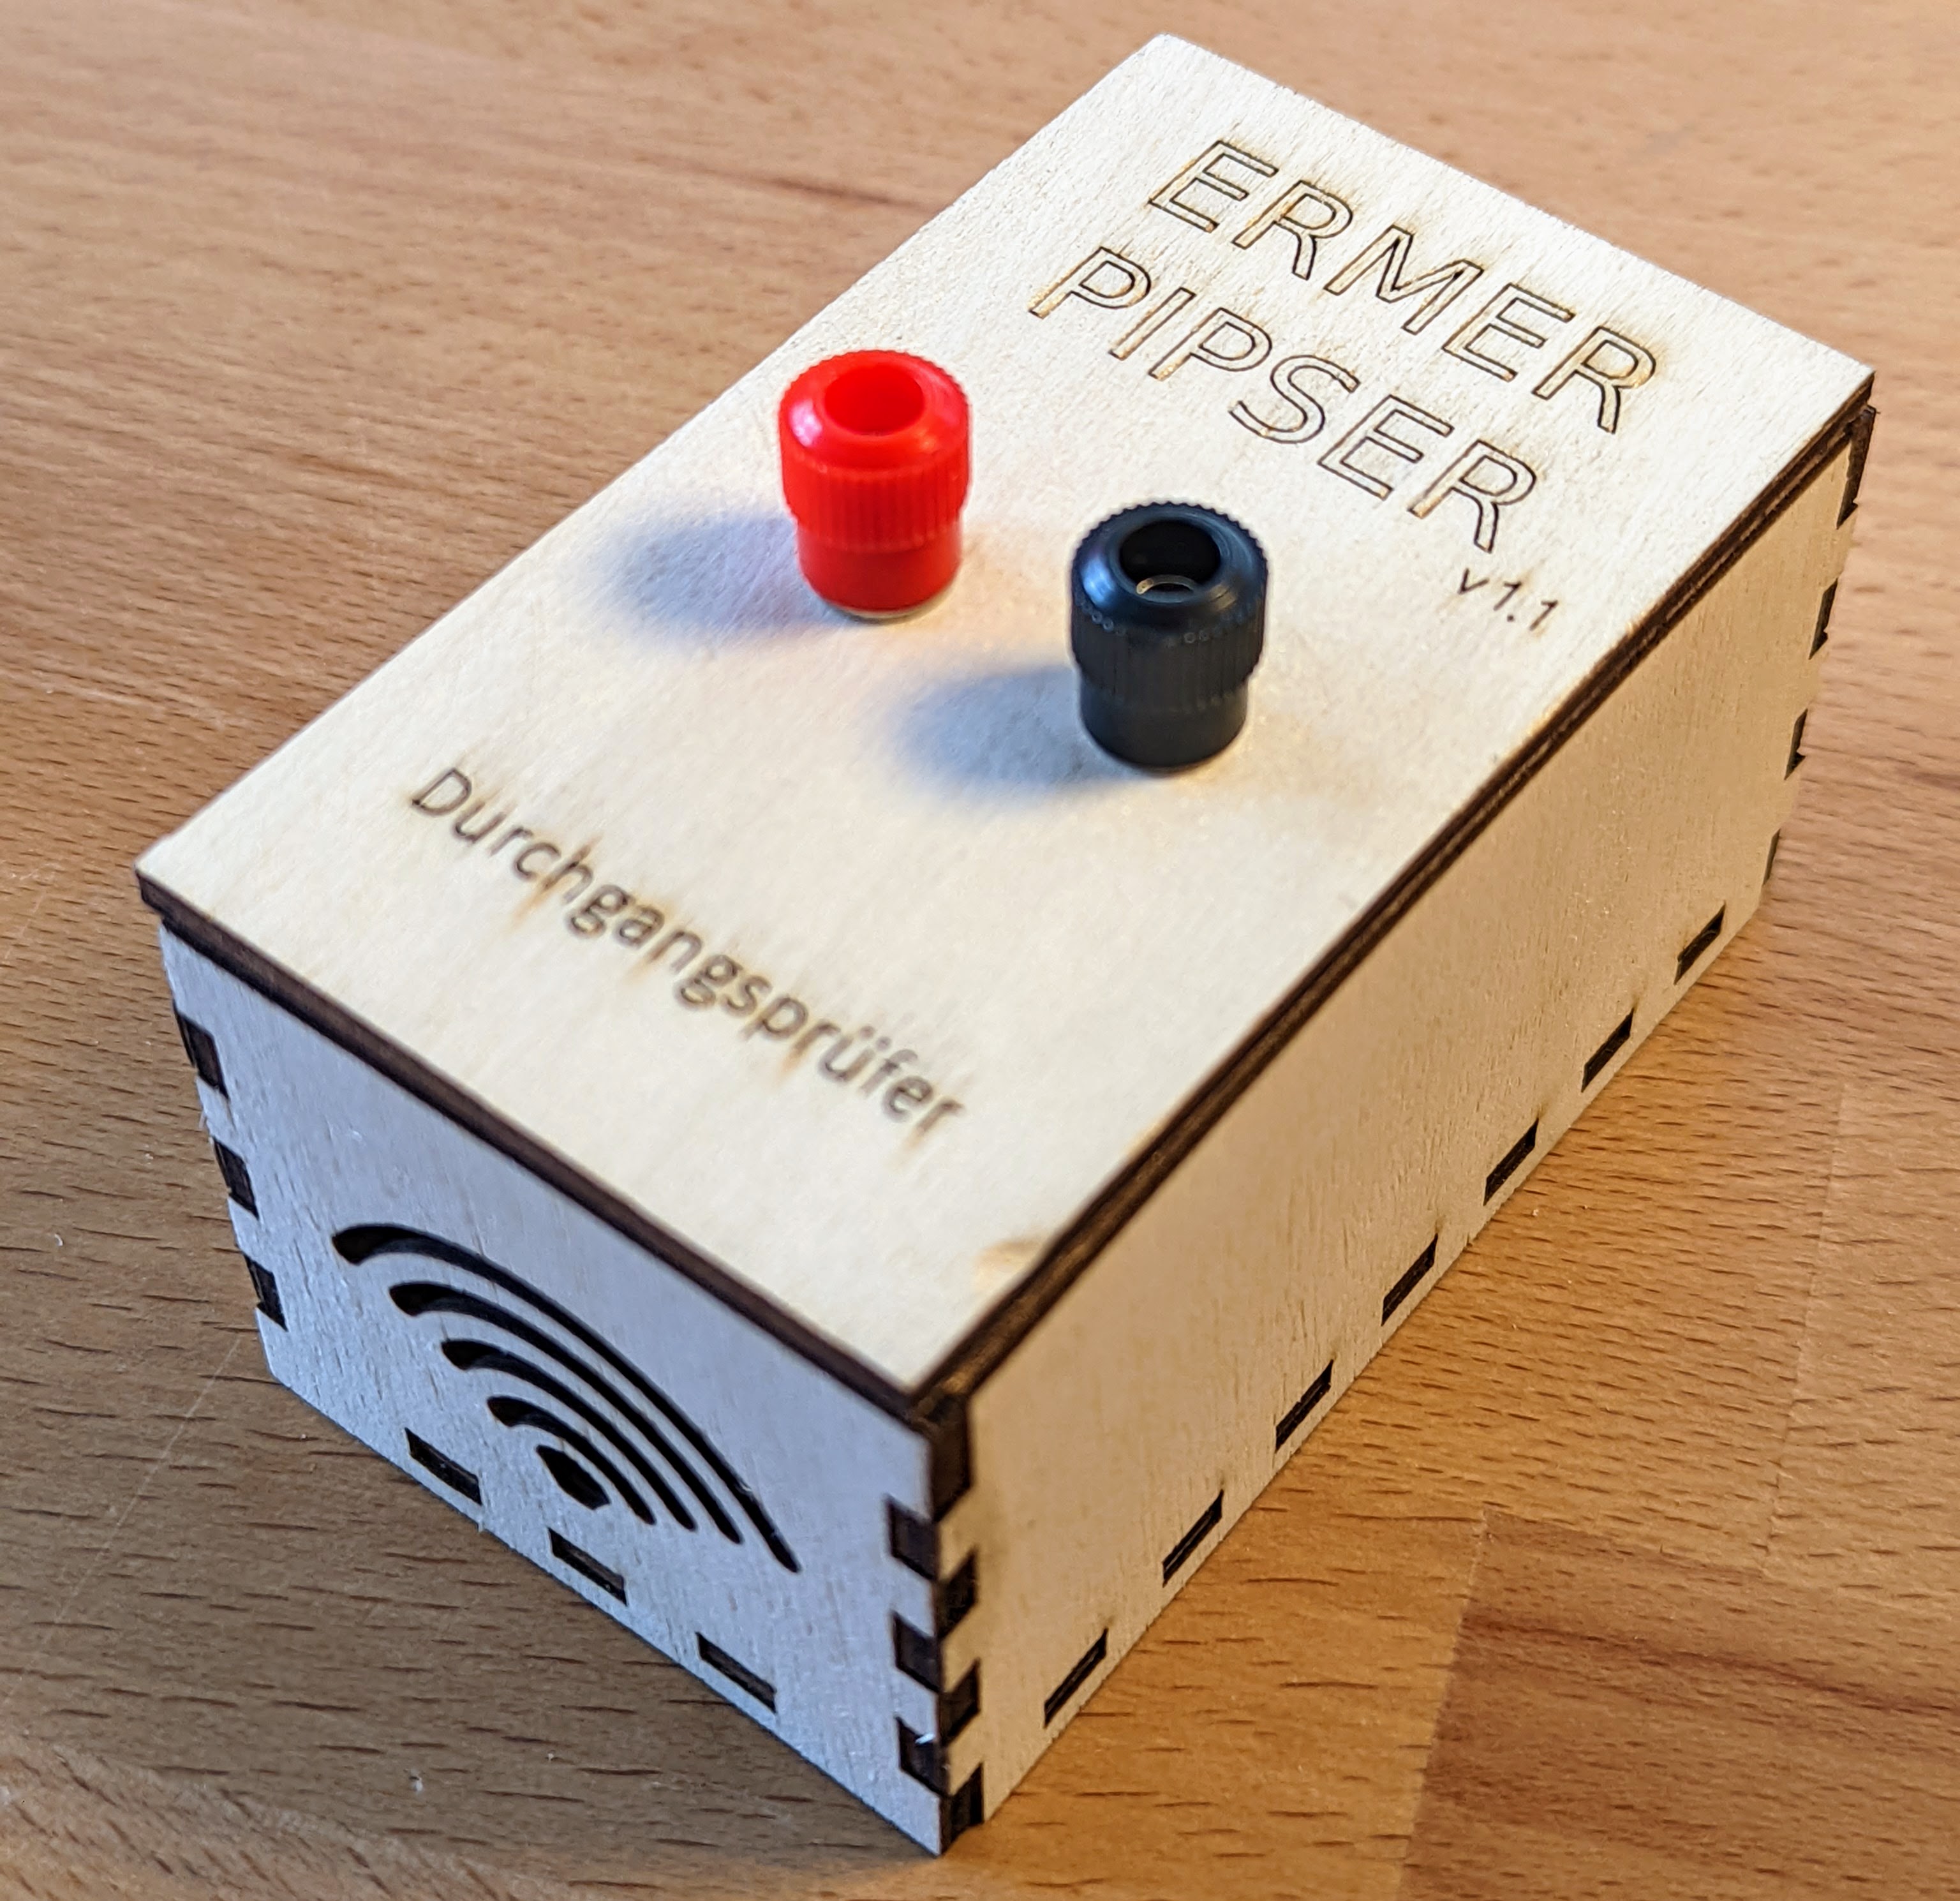 Ermer beeper - continuity tester not of this world